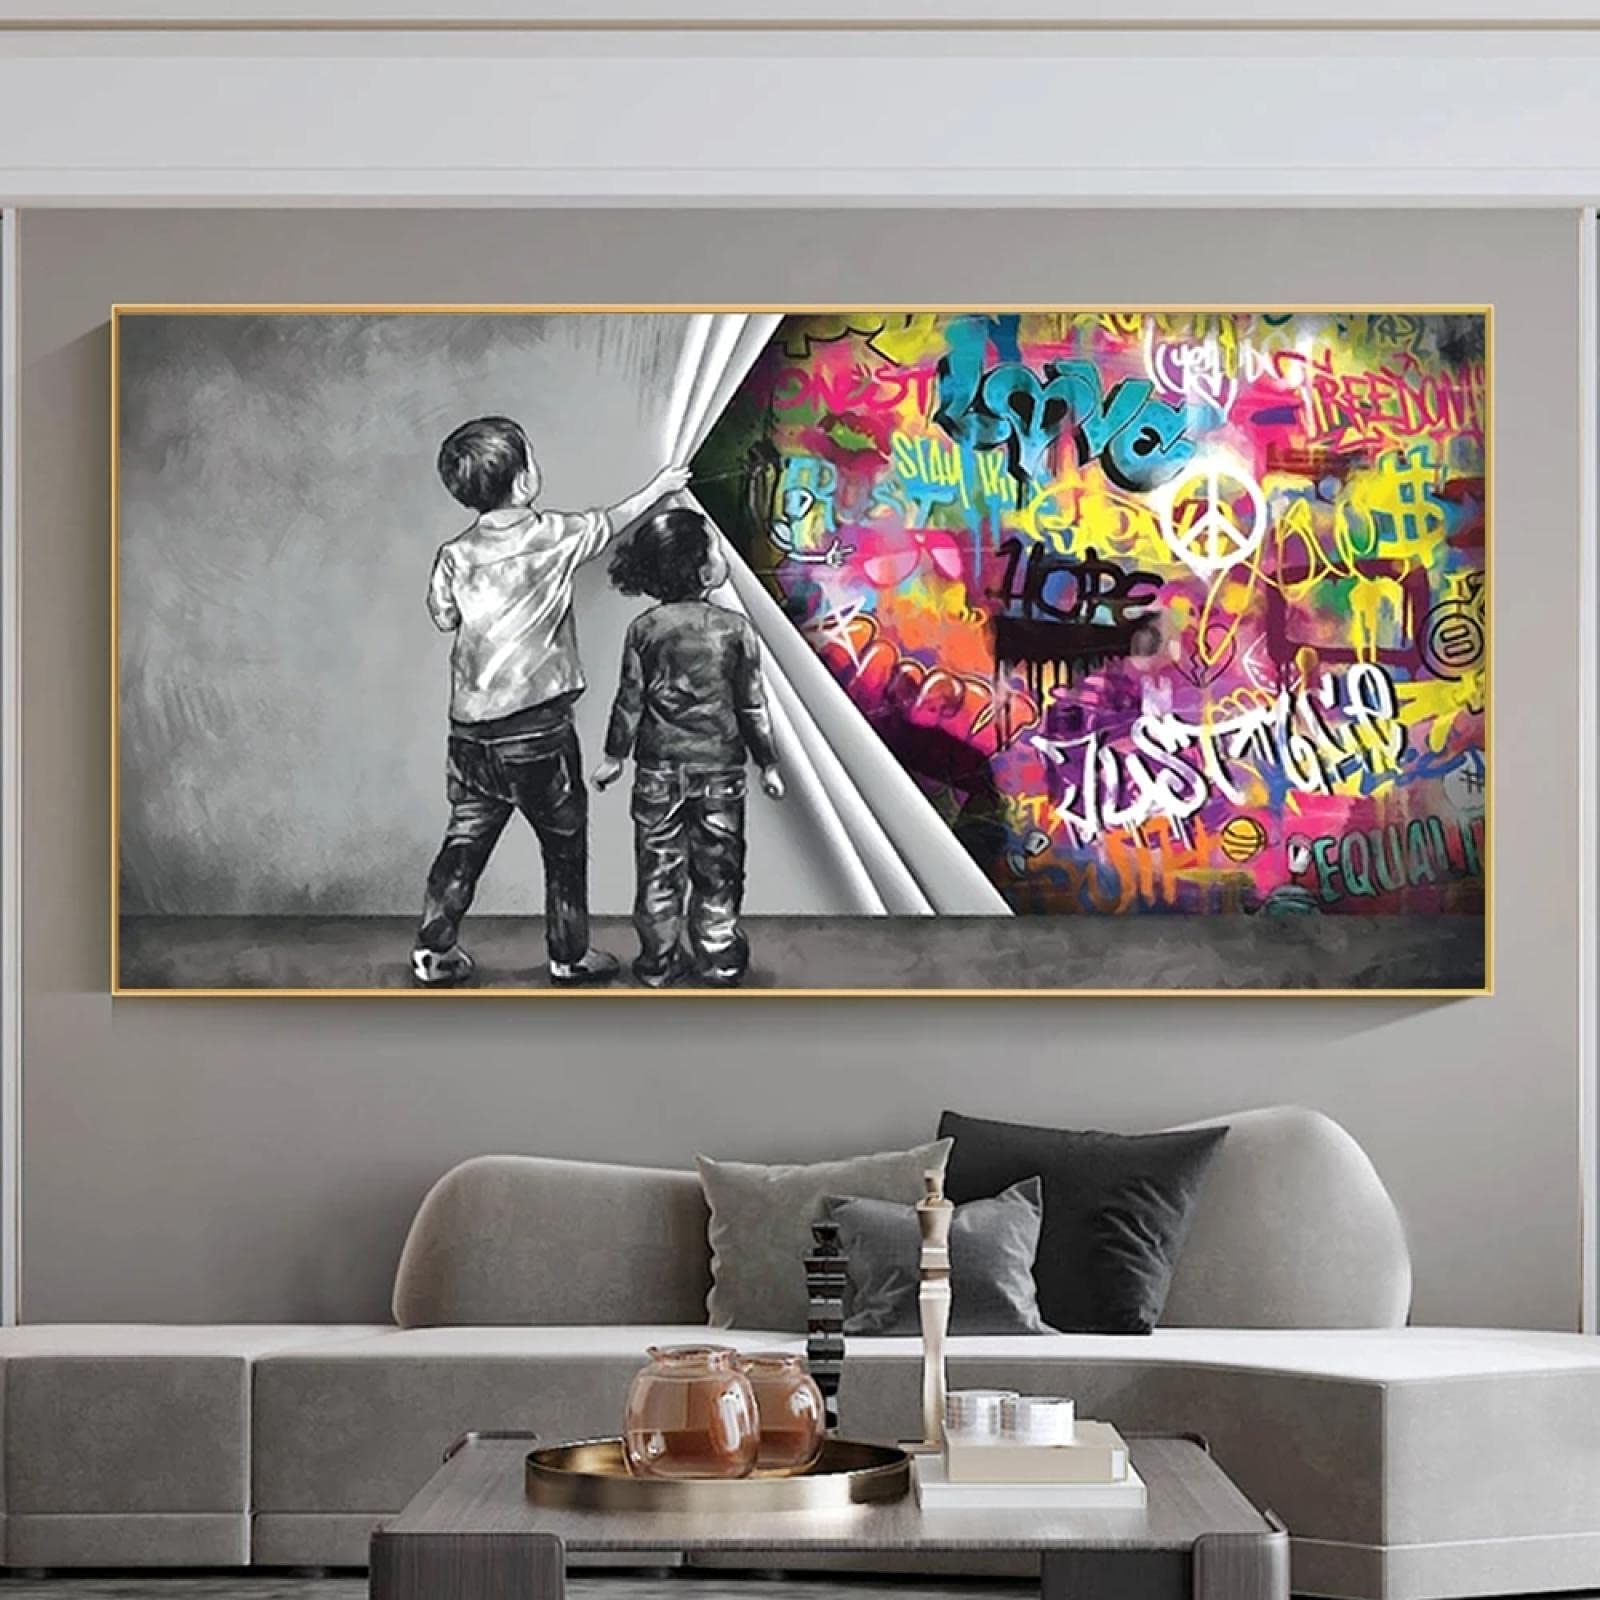 Cuadros Behind The Curtain Banksy Graffiti Canvas Paintings Posters and Prints Wall Art Pictures for Living Room Home Decor 70x140cm Frameless